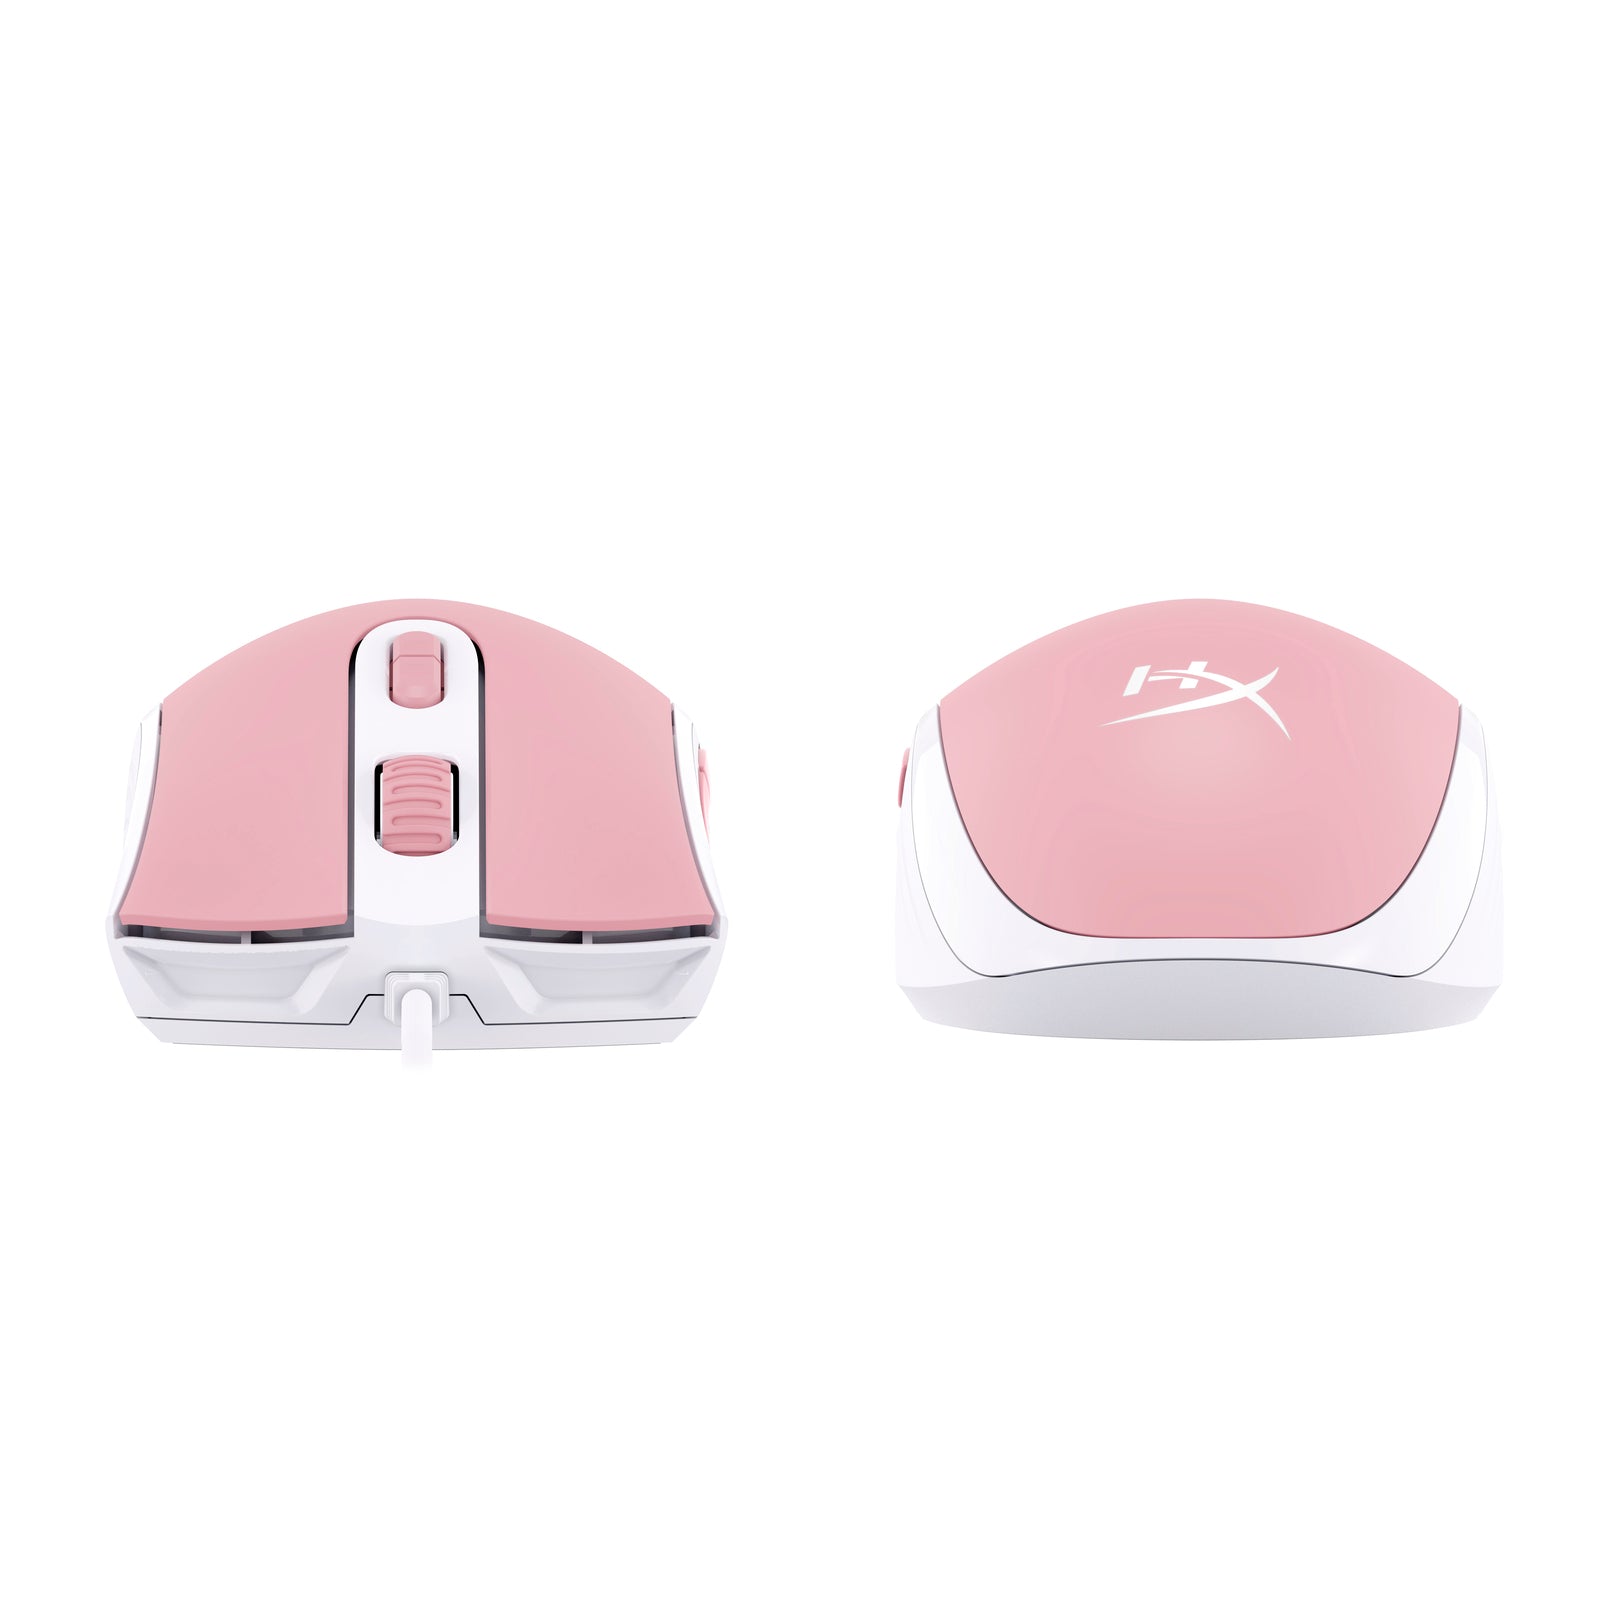 HyperX Pulsefire Core Pink Gaming Mouse showing both Back and Front Sides